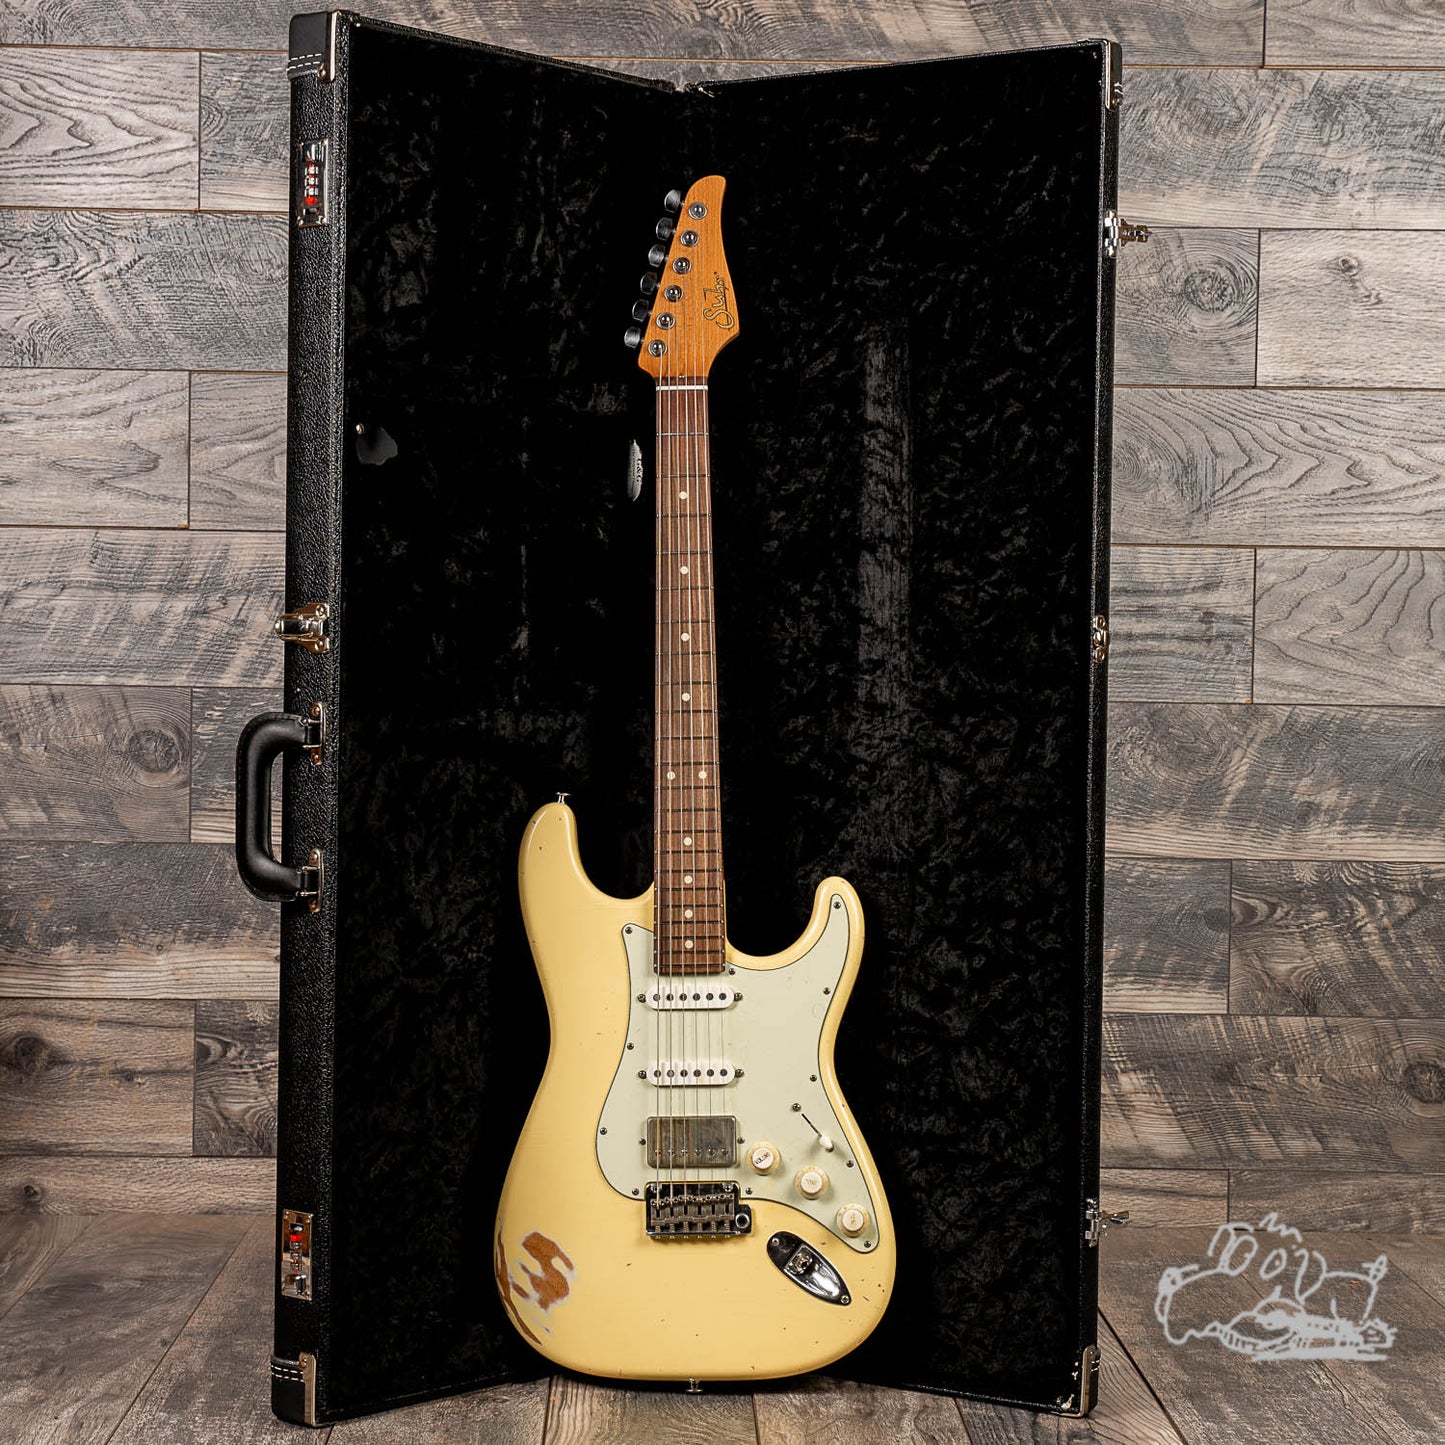 2019 Suhr Classic S Antique - Roasted Maple Neck - Indian Rosewood Board